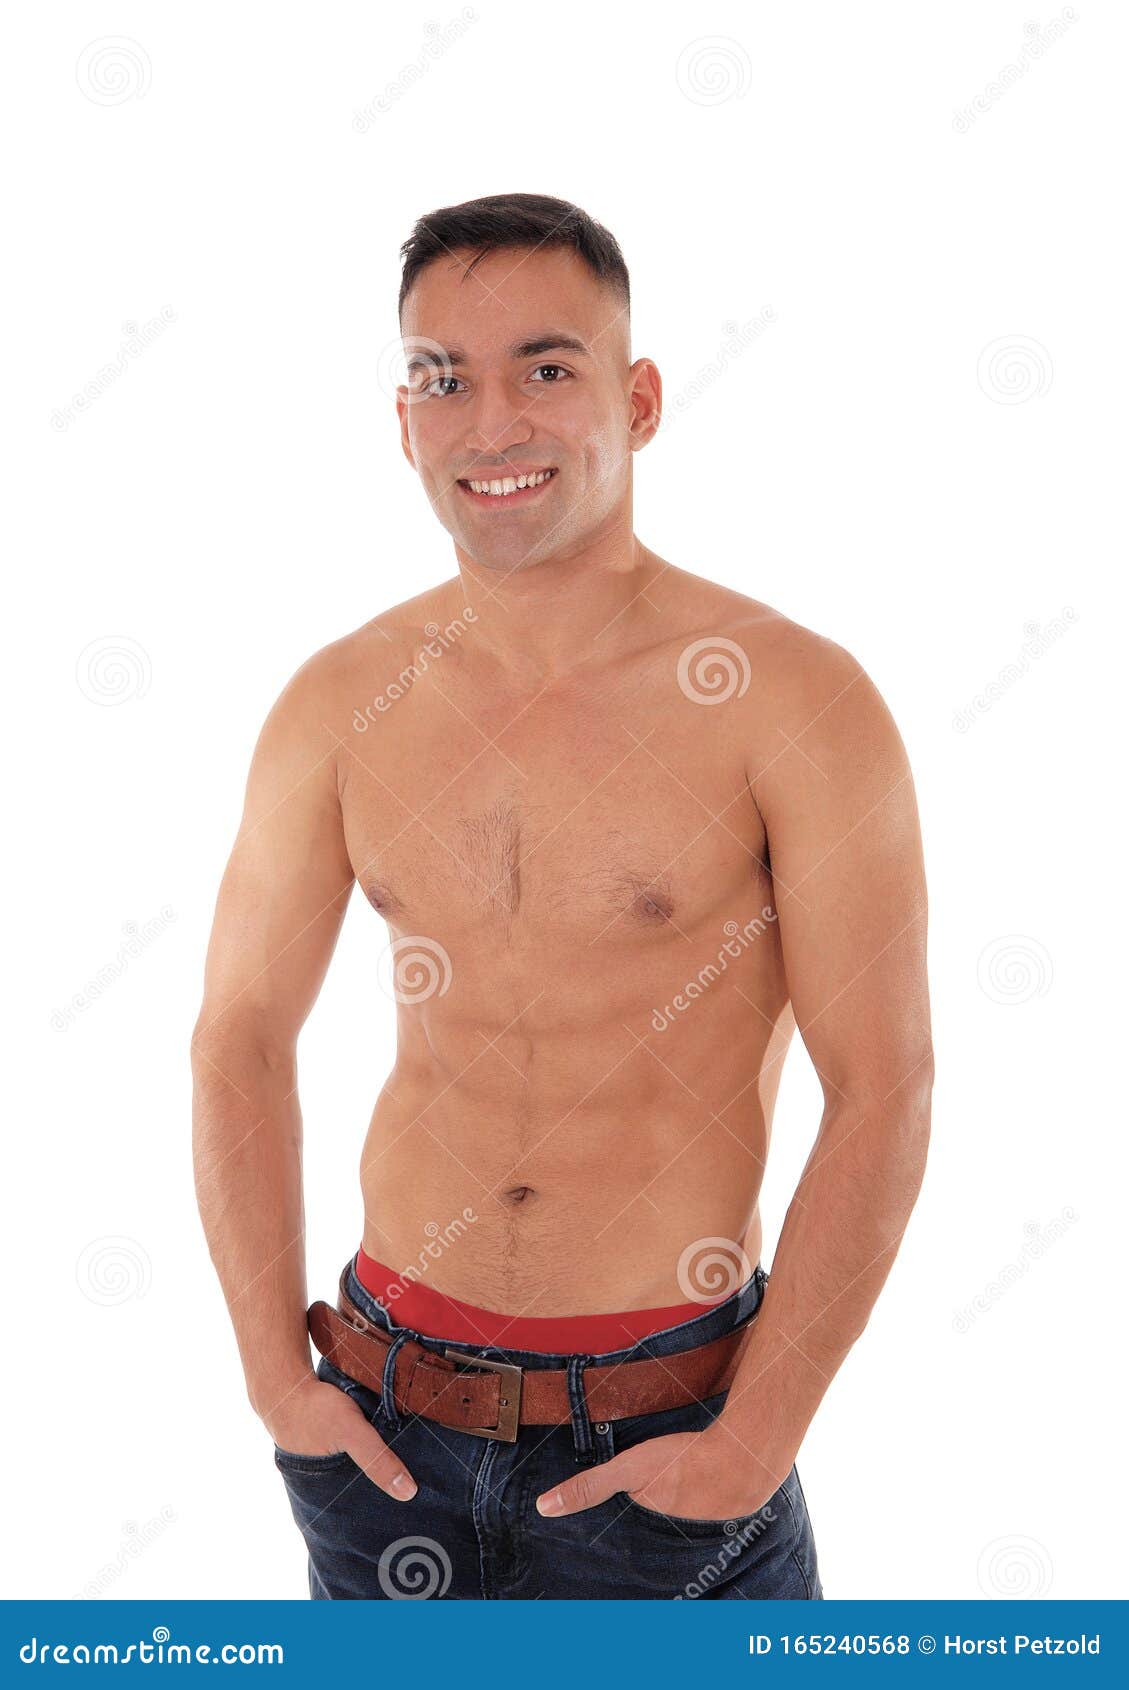 Shirtless Muscle Man Looking Up Into Bright Overhead Light 